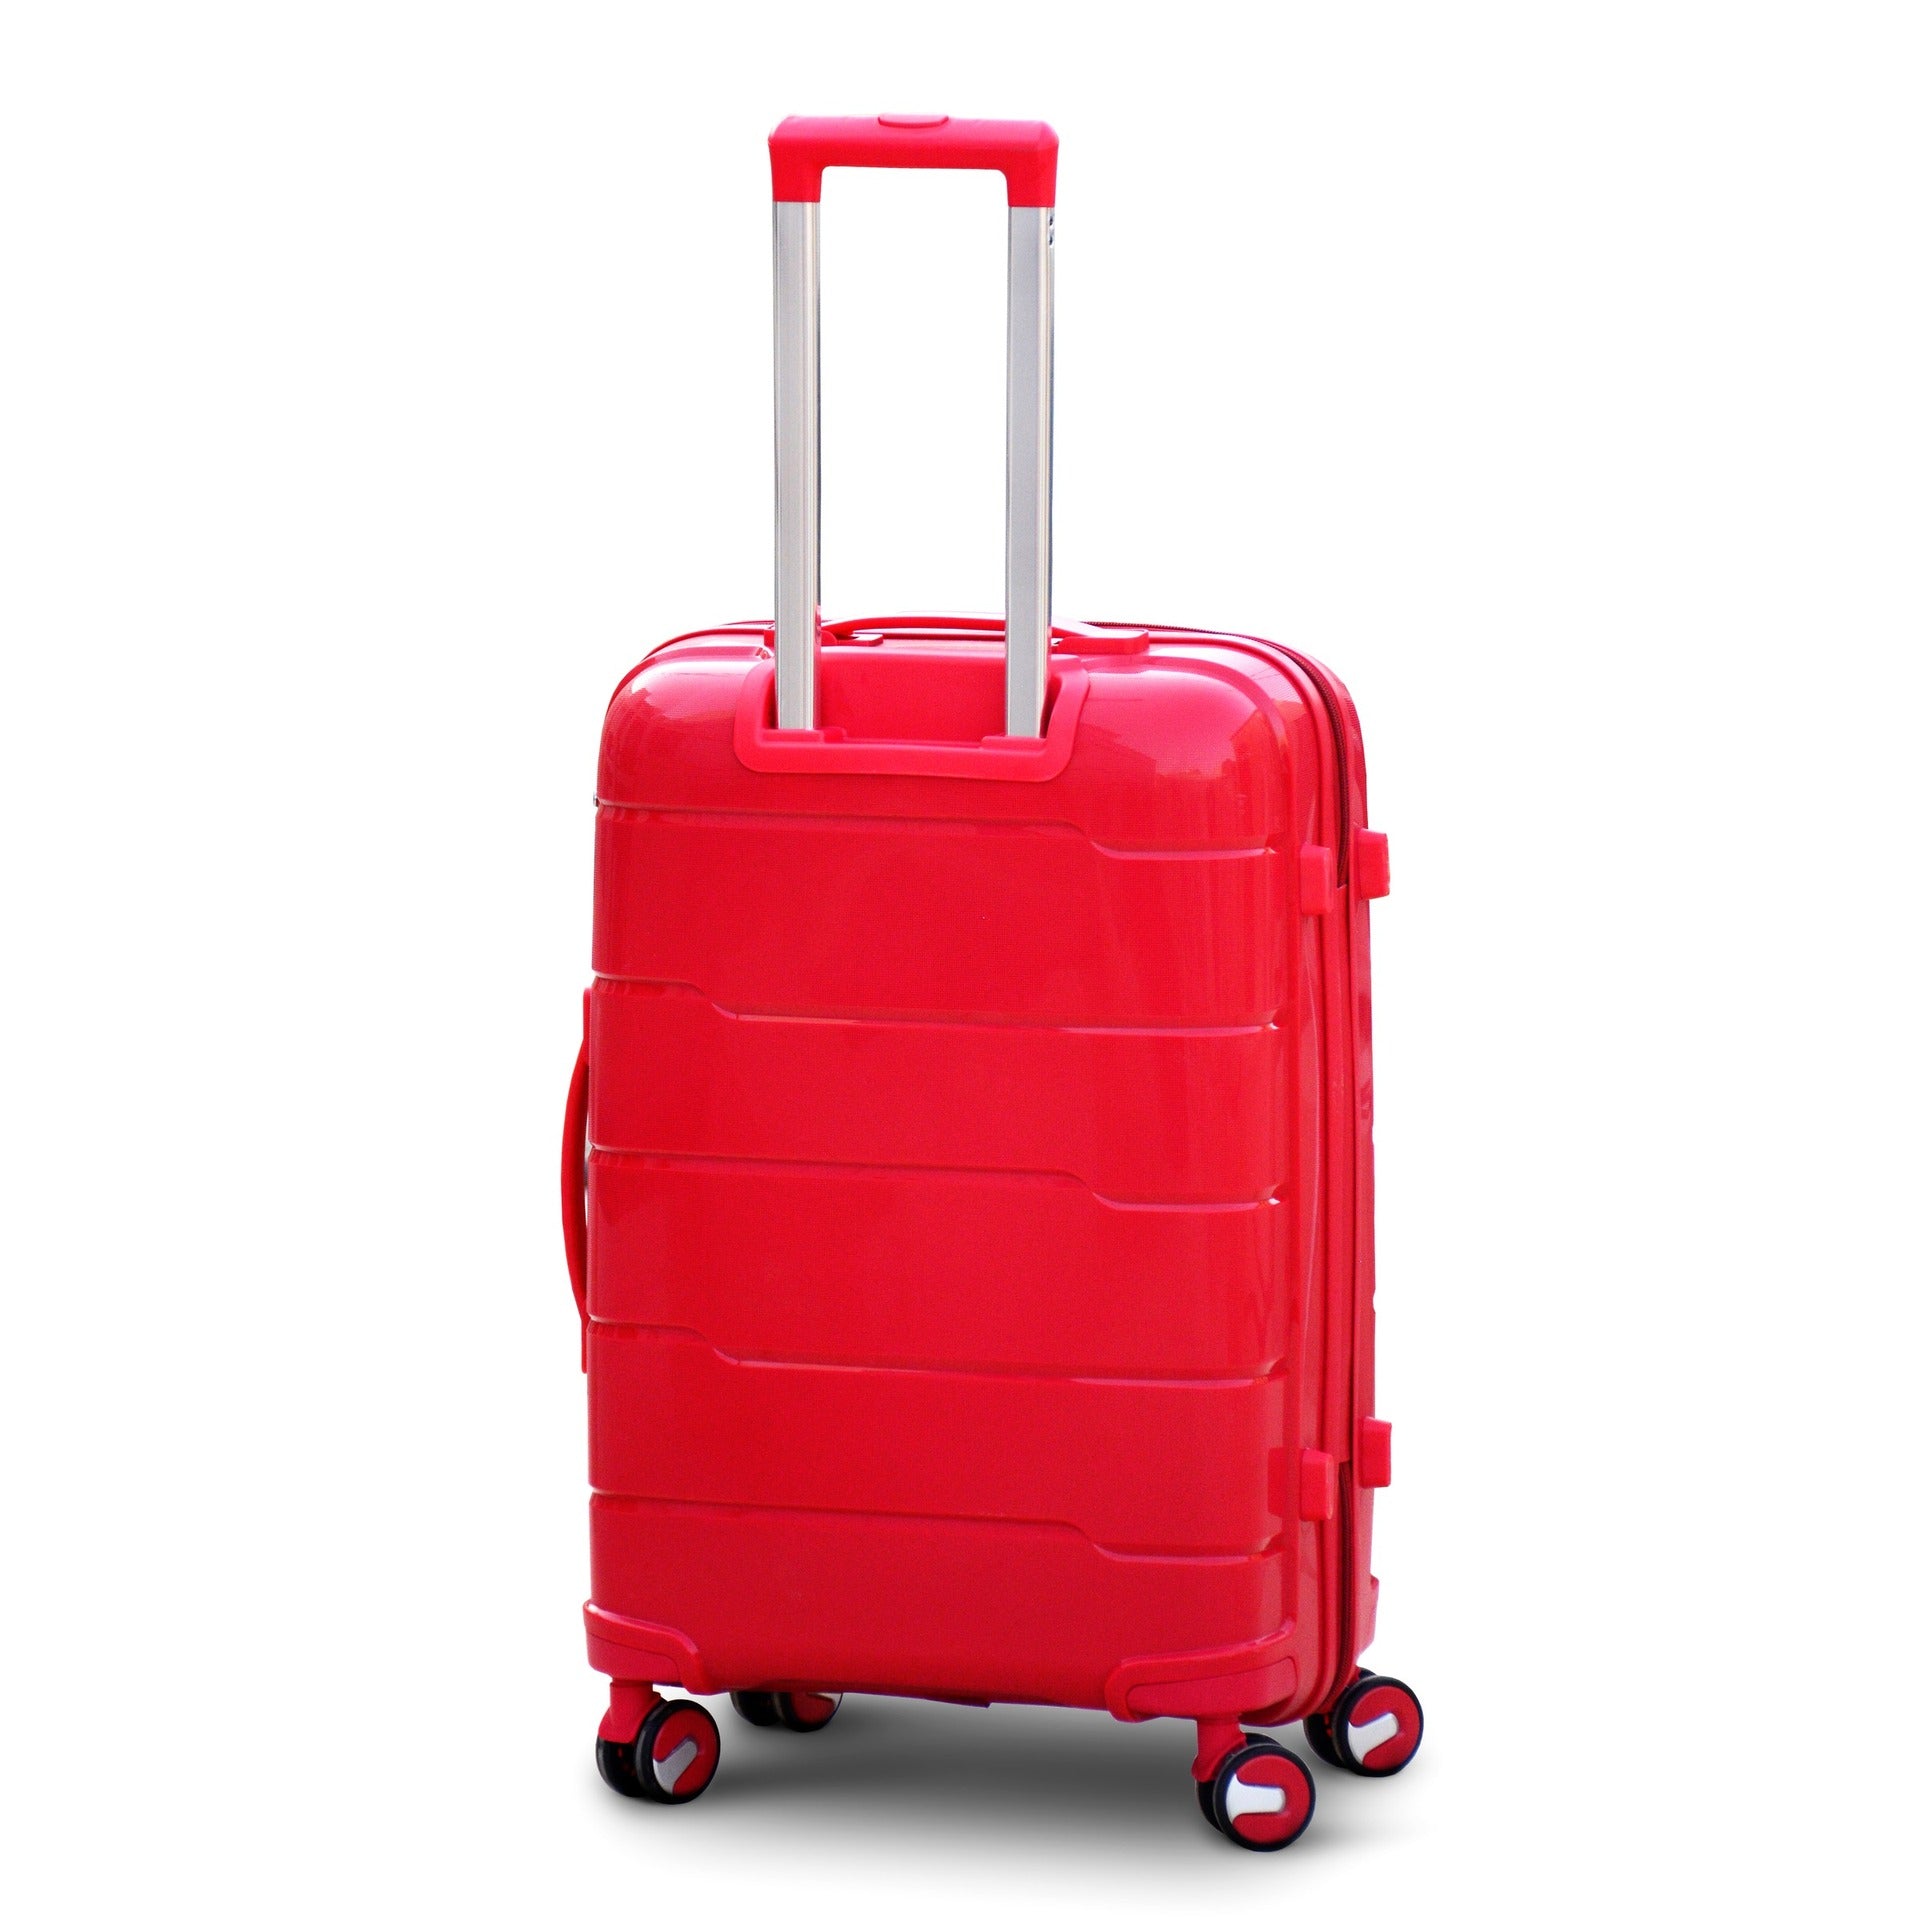 3 Piece Full Set 20" 24" 28 Inches Red Colour Ceramic Smooth PP Luggage lightweight Hard Case Trolley Bag with Double Spinner Wheel